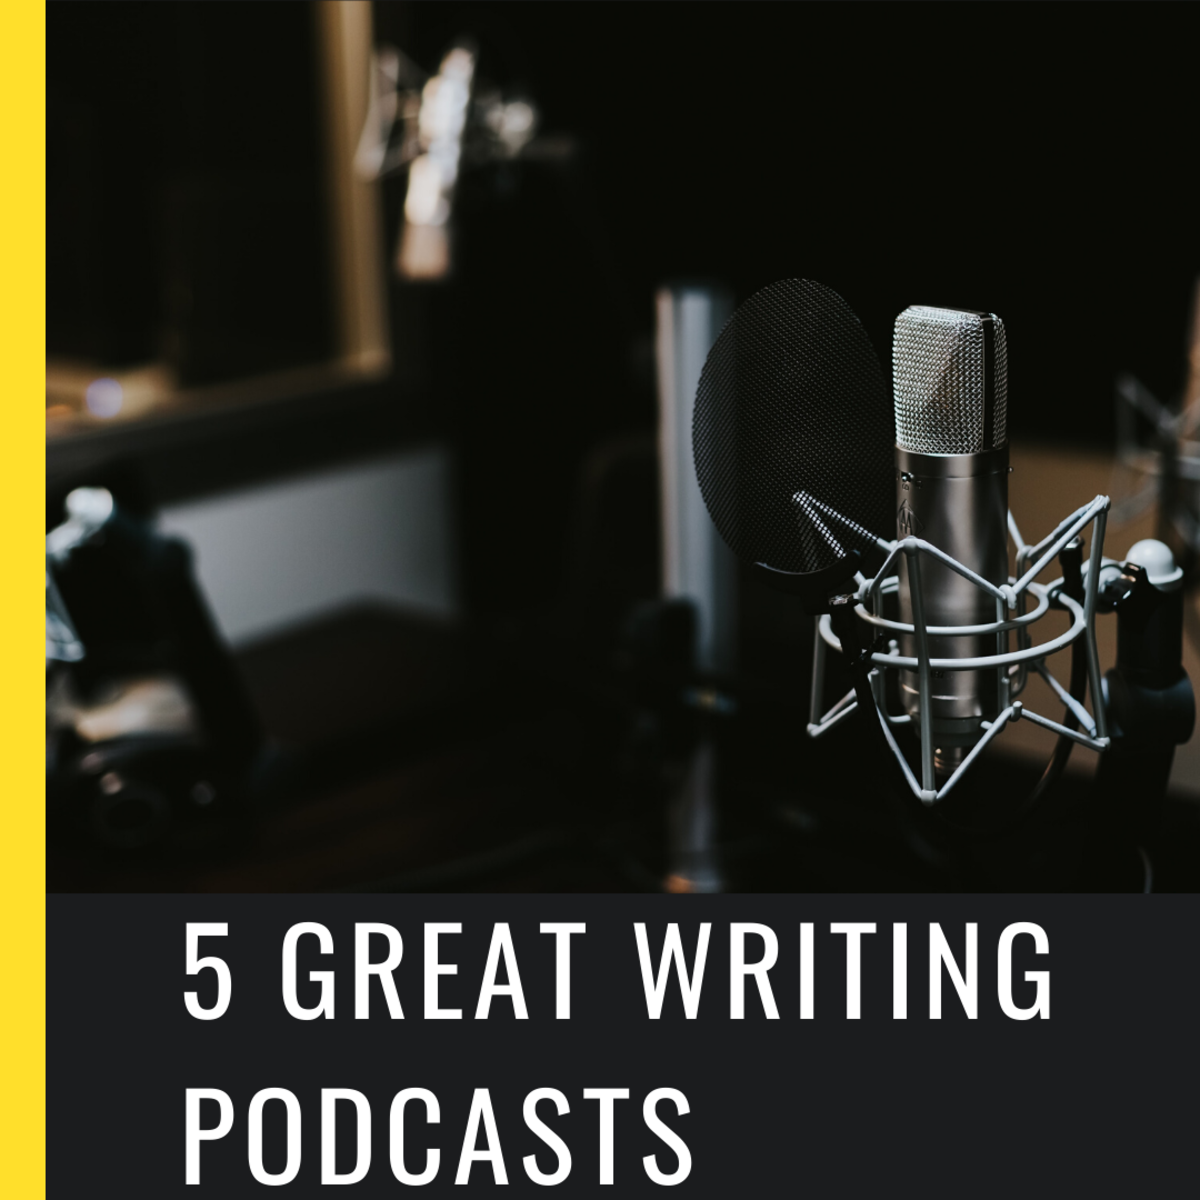 5 Writing Podcasts That Every Aspiring Author Should Listen To